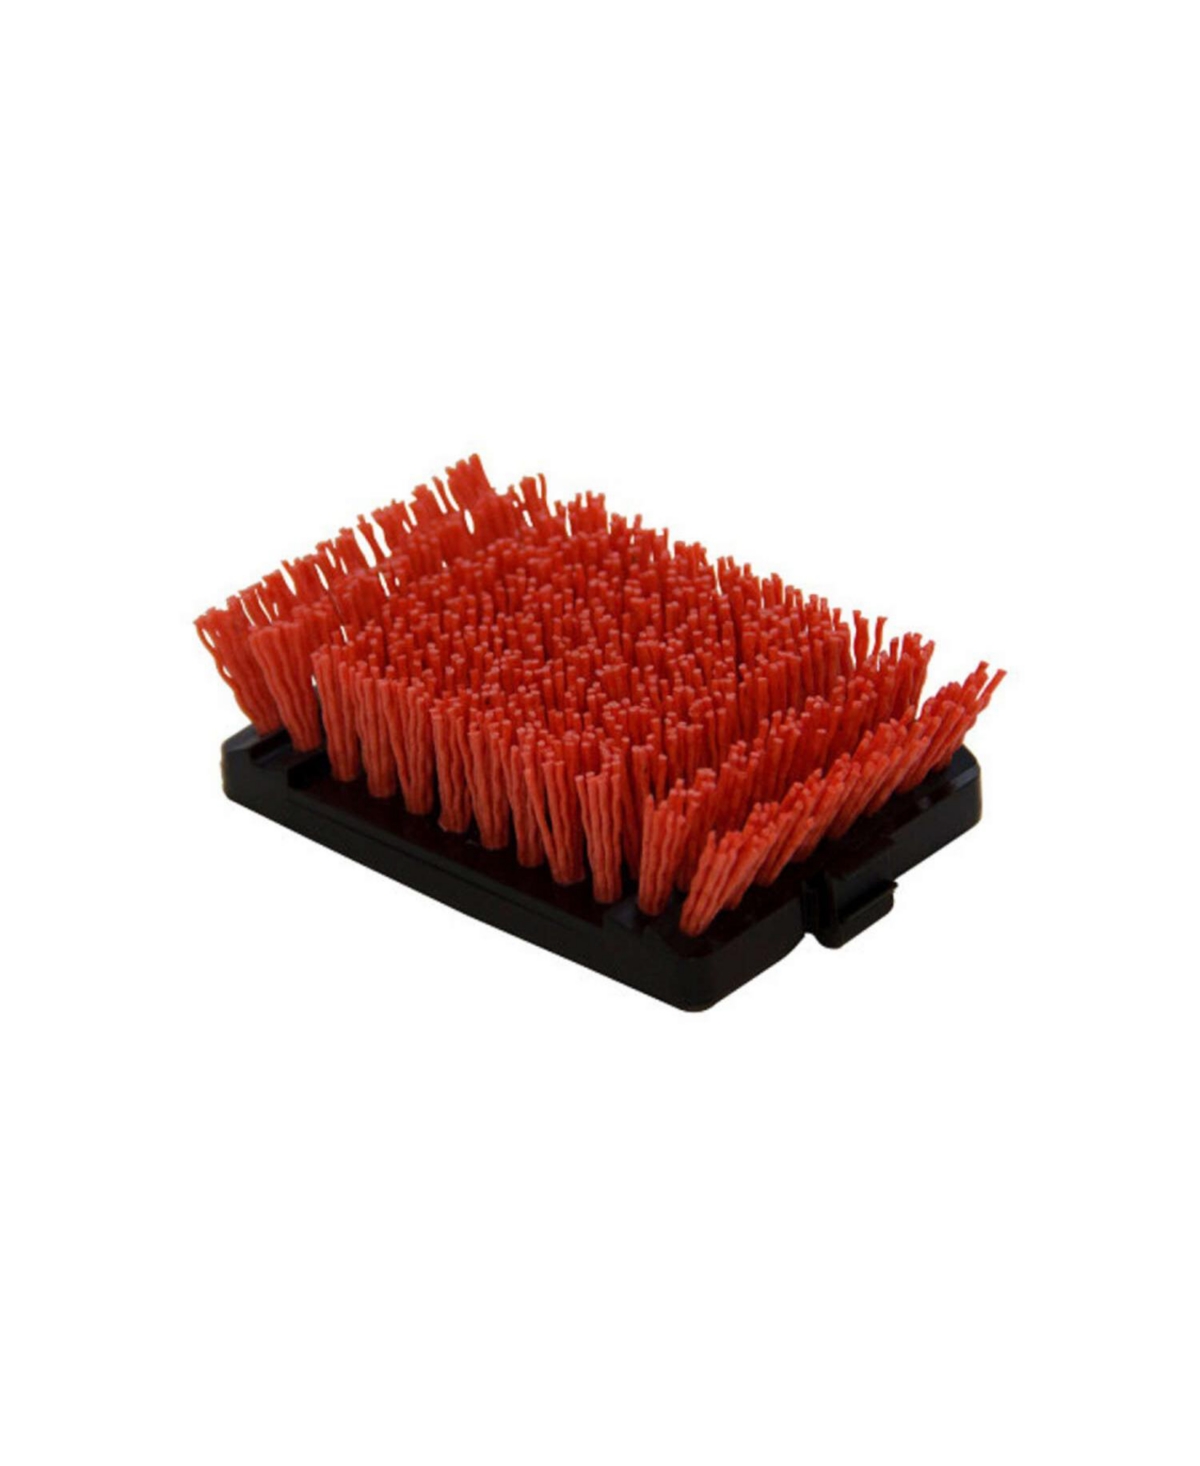 Char-Broil 8011444 Cool-Clean Polypropylene Replacement Grill Brush Head, Black & Red - Black